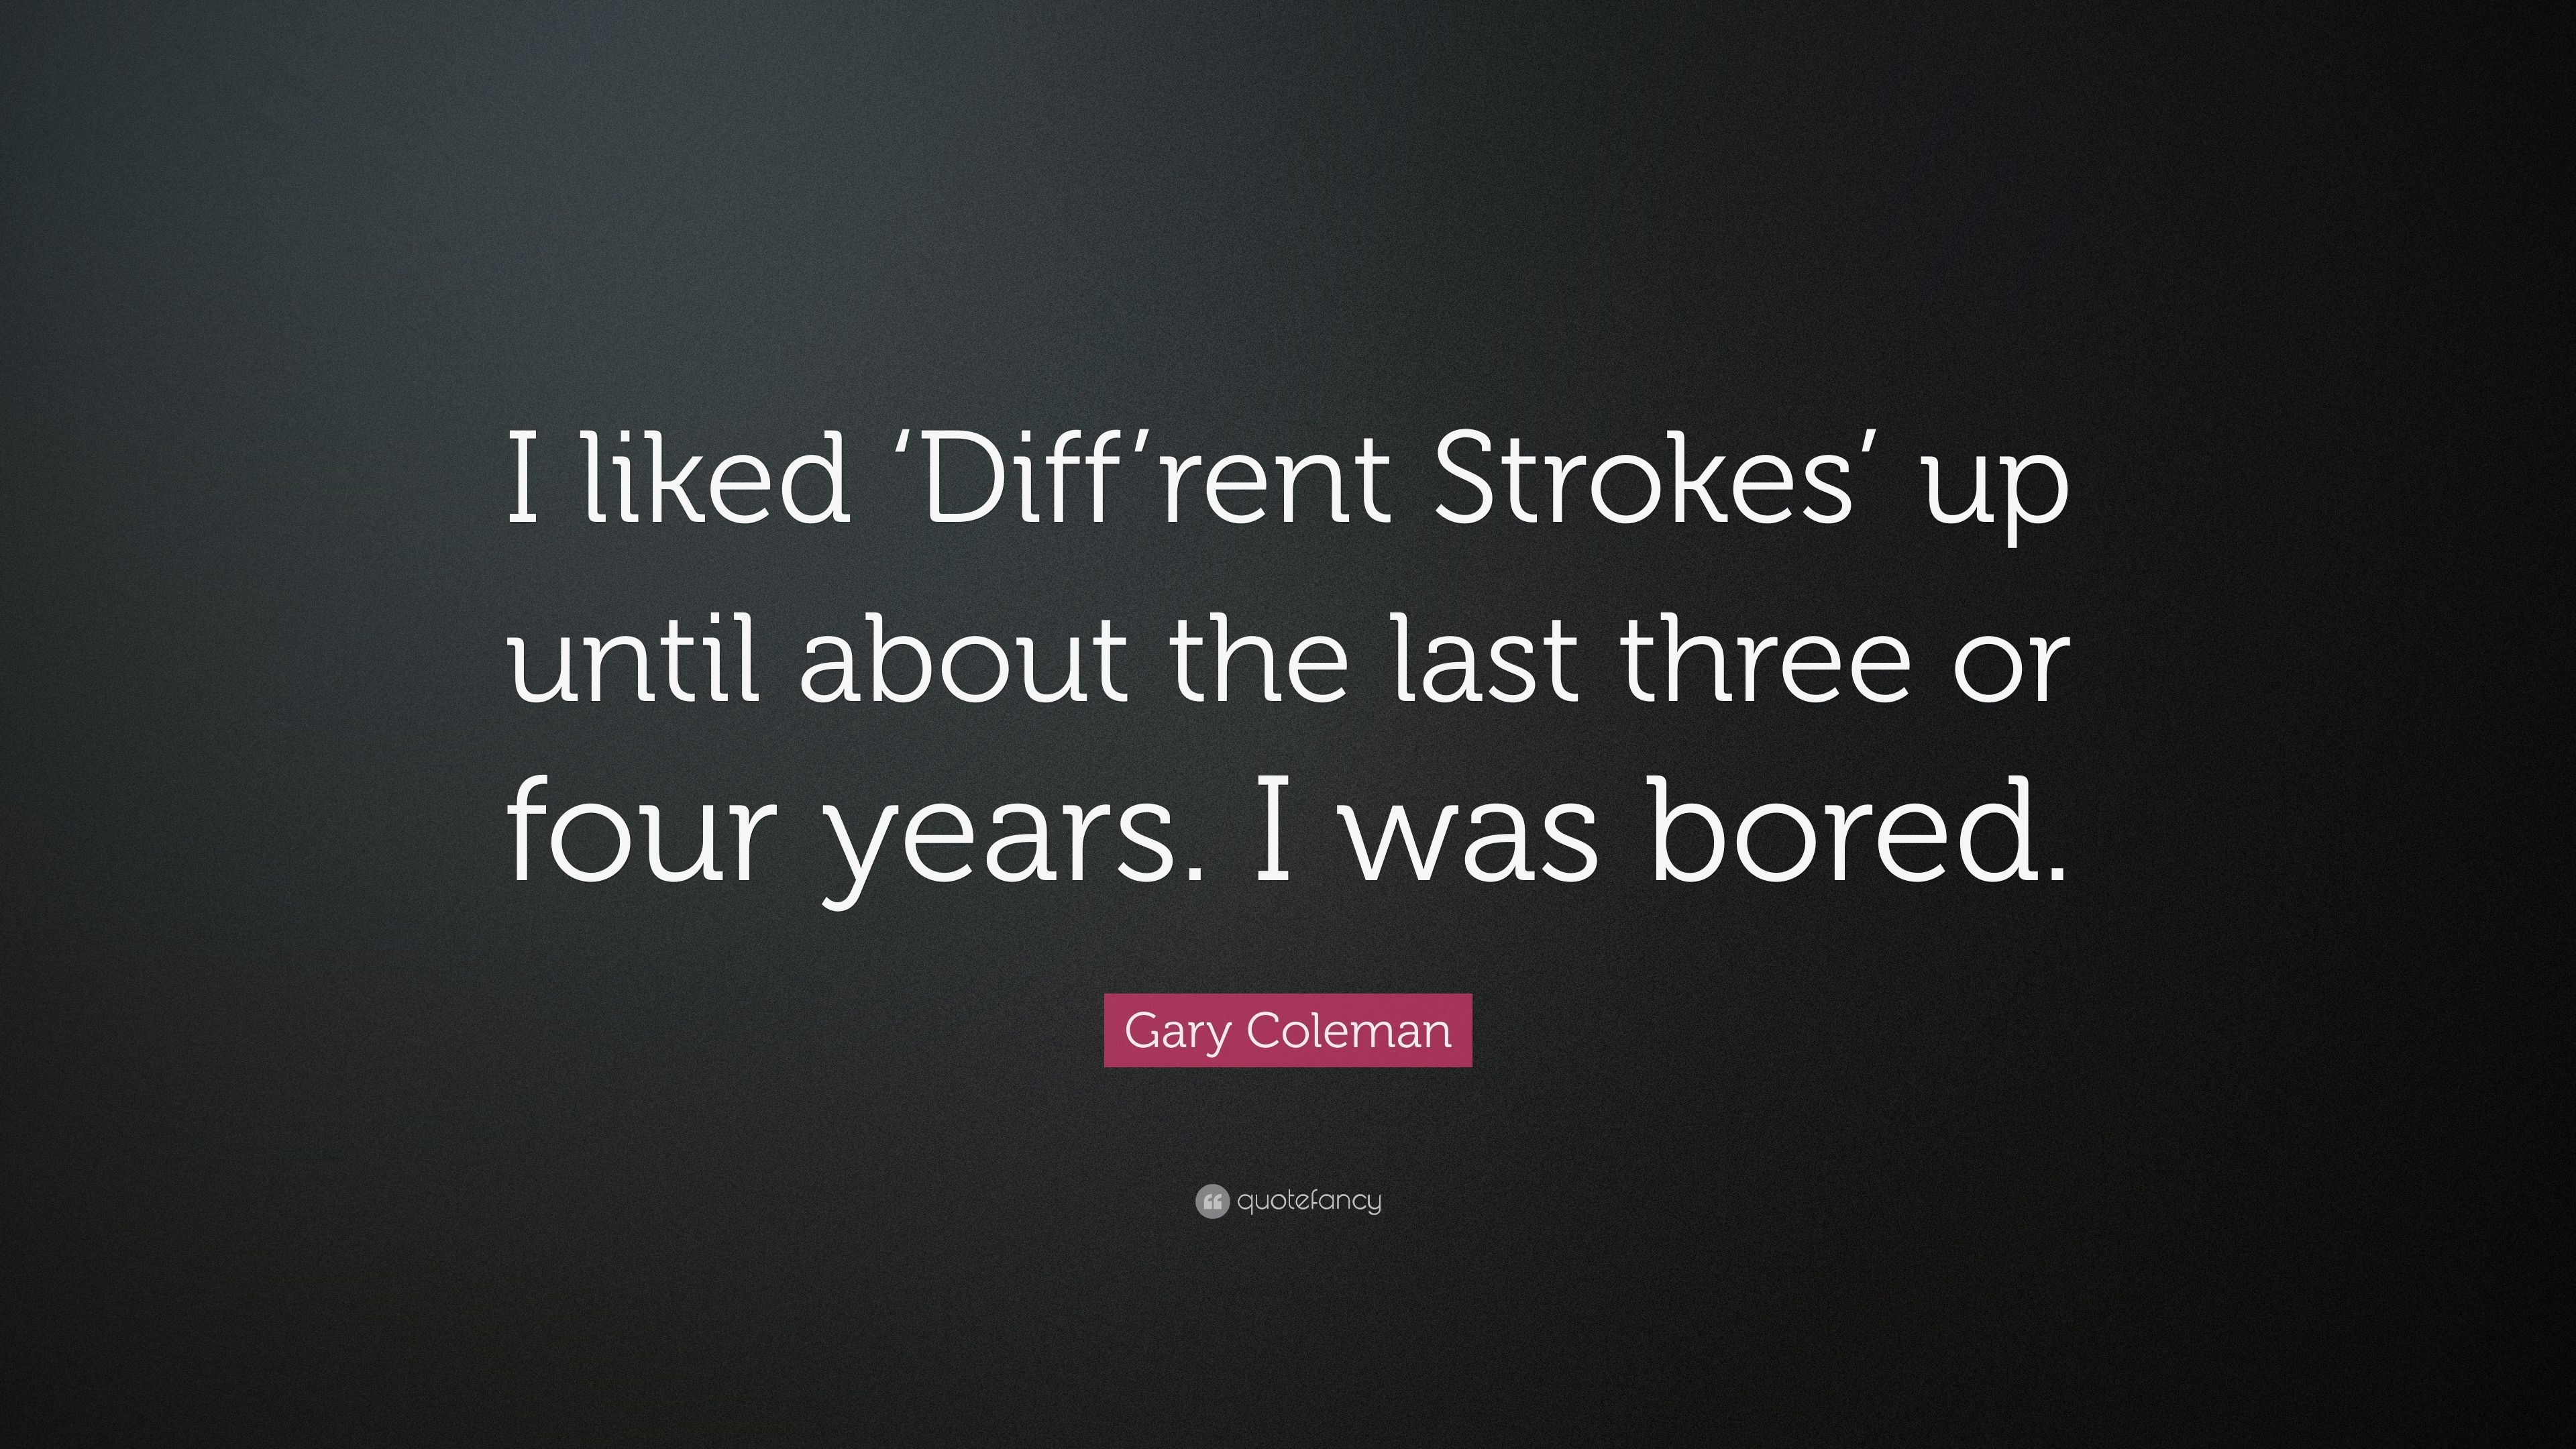 Gary Coleman Quote: “I liked 'Diff'rent Strokes' up until about